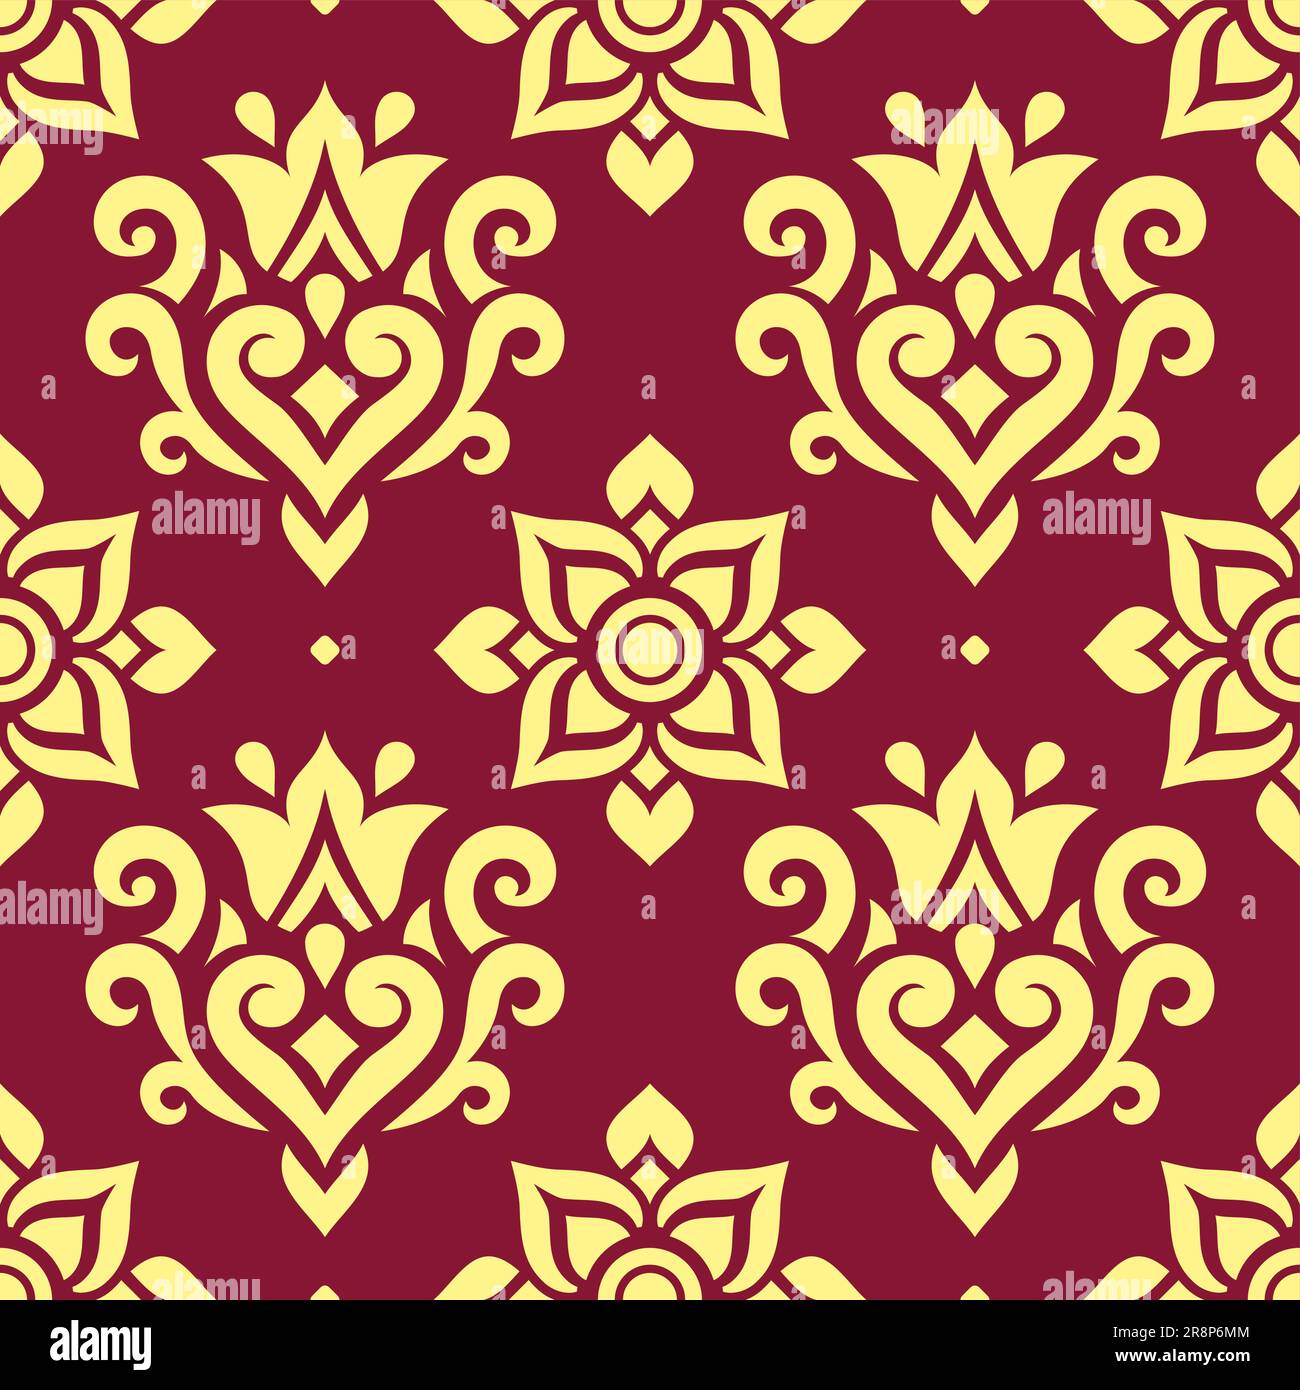 Thai vector seamless pattern with flowers, hearts and swirls, traditional ornament from Thailand in yellow on brown background Stock Vector